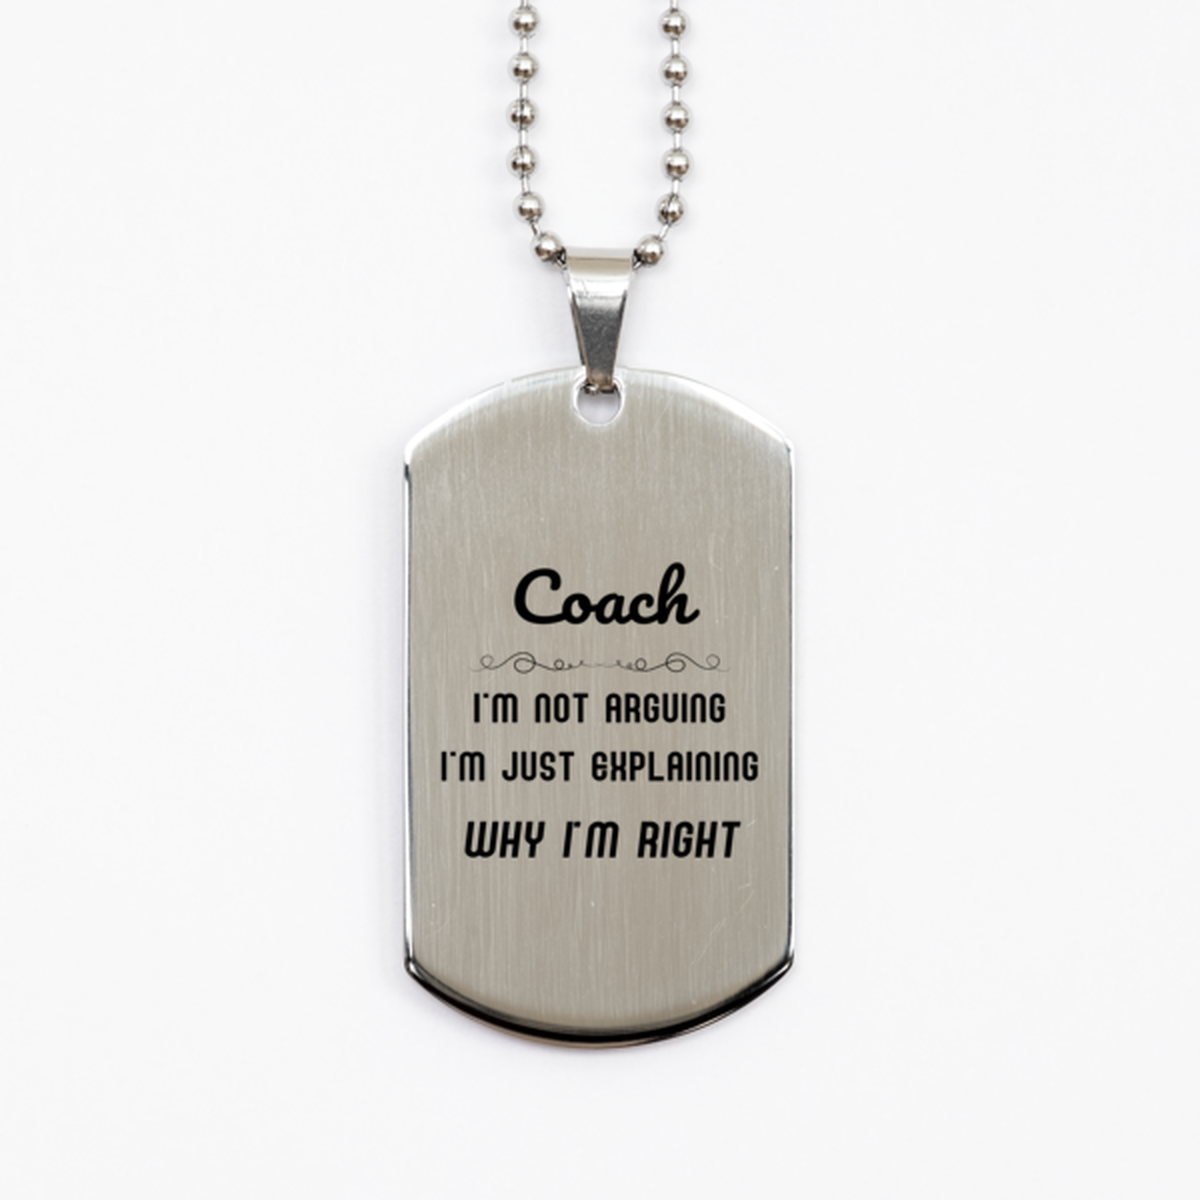 Coach I'm not Arguing. I'm Just Explaining Why I'm RIGHT Silver Dog Tag, Funny Saying Quote Coach Gifts For Coach Graduation Birthday Christmas Gifts for Men Women Coworker